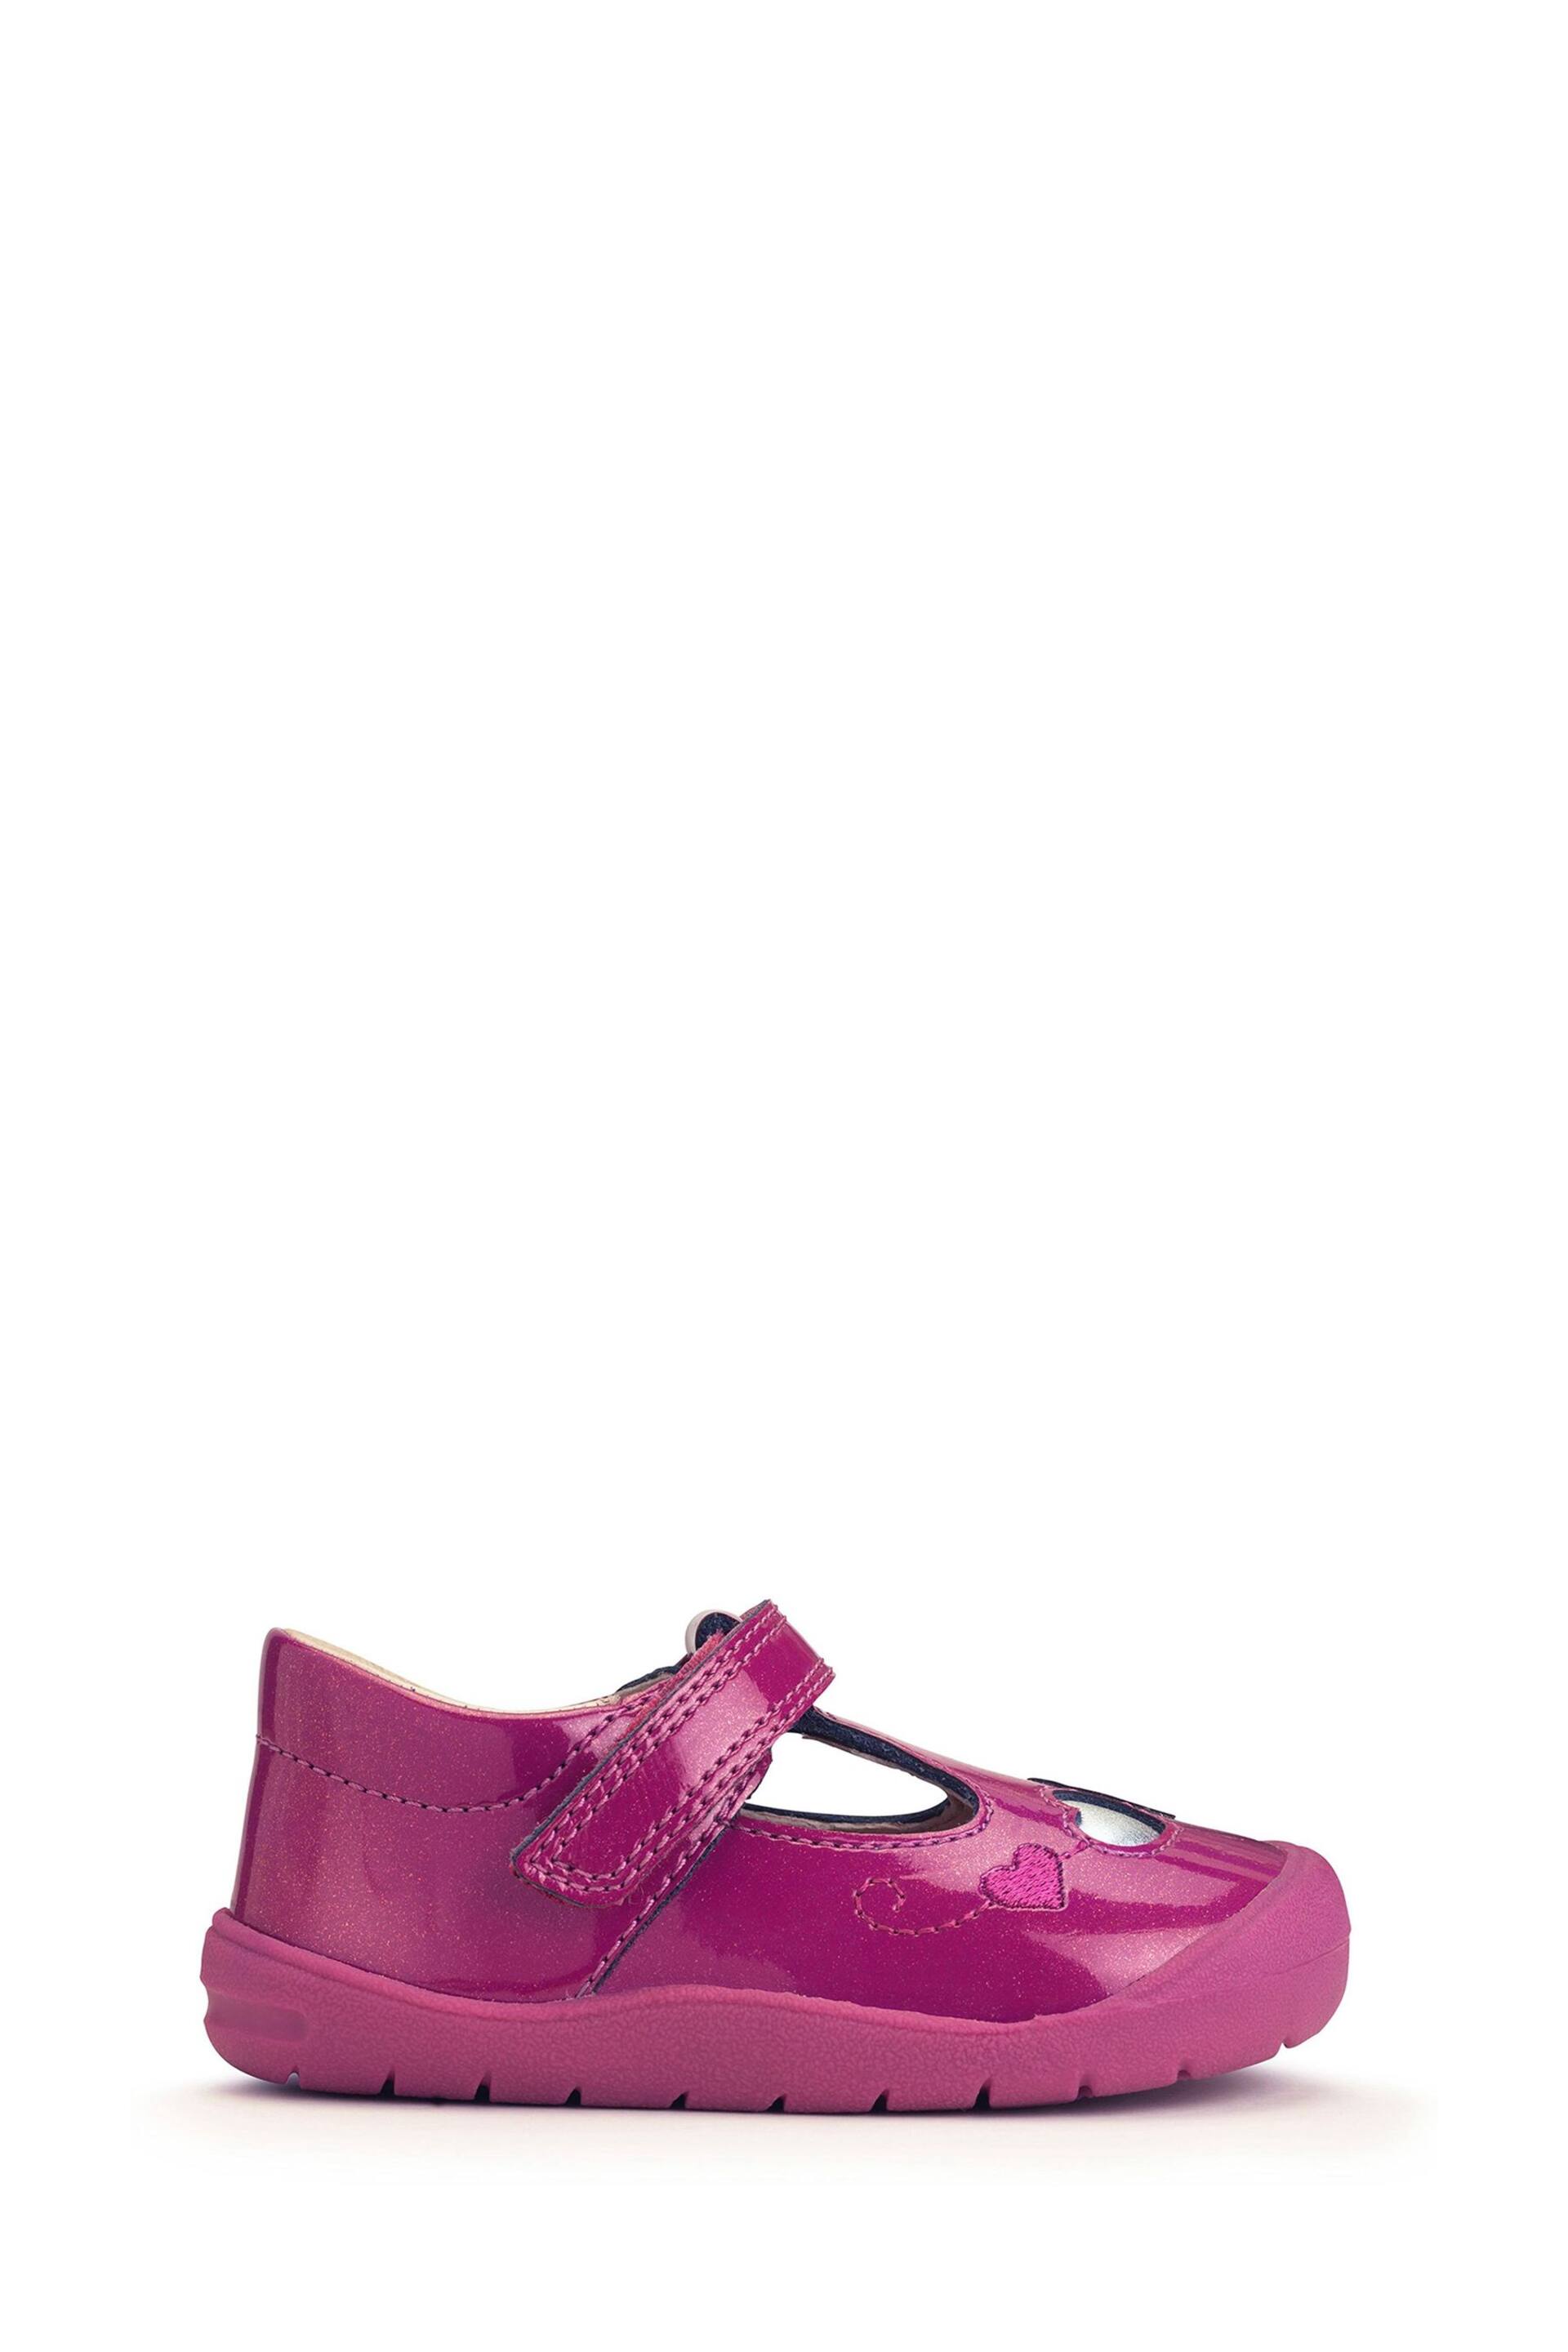 Start Rite Purple Party Berry Glitter Patent Leather T-Bar Toddler Shoes - Image 2 of 6